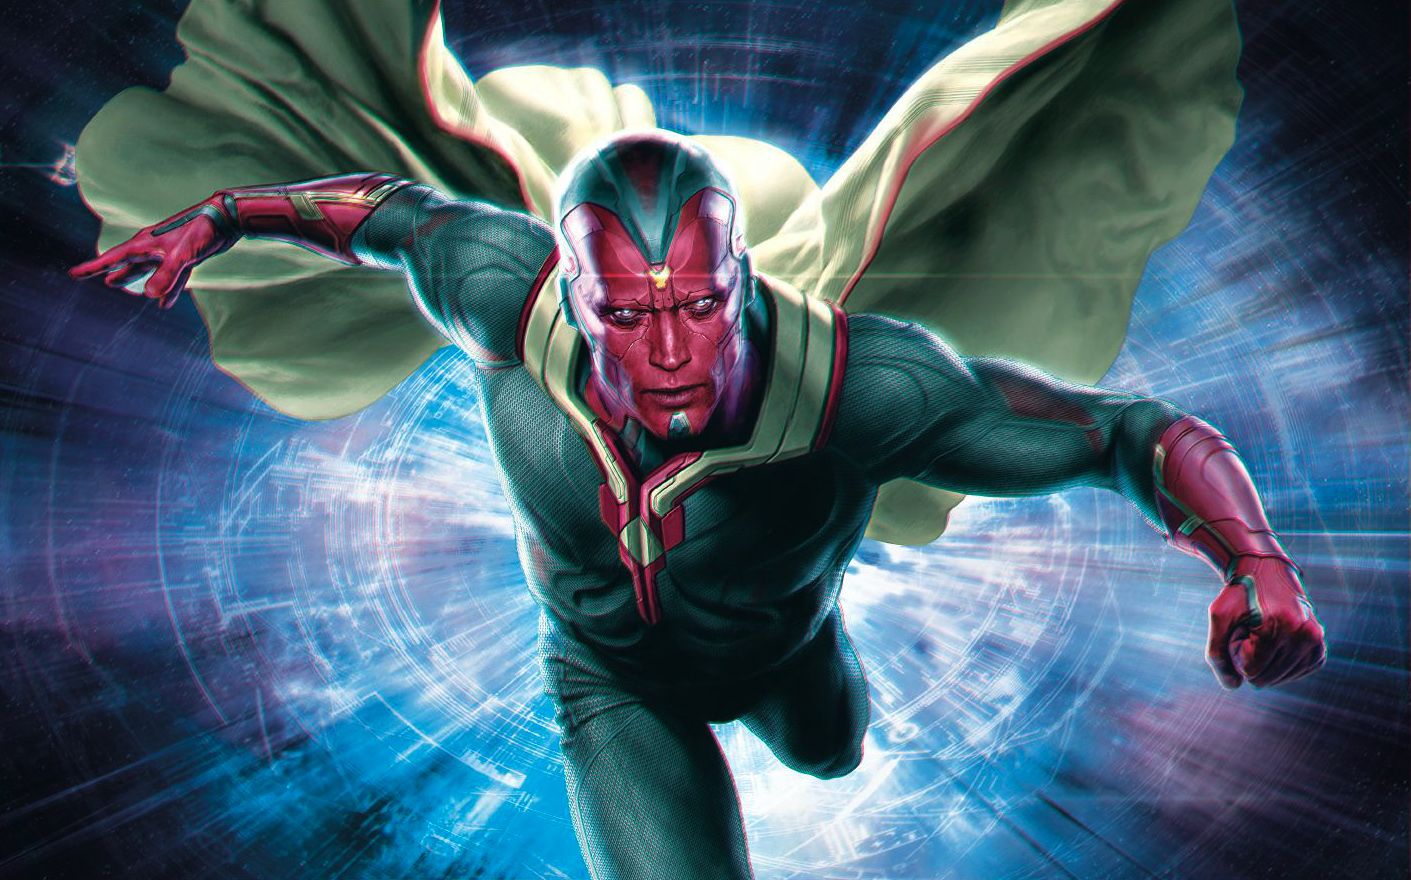 Facts You Should Know About the Superhero Vision Before Watching Avengers: Age of Ultron